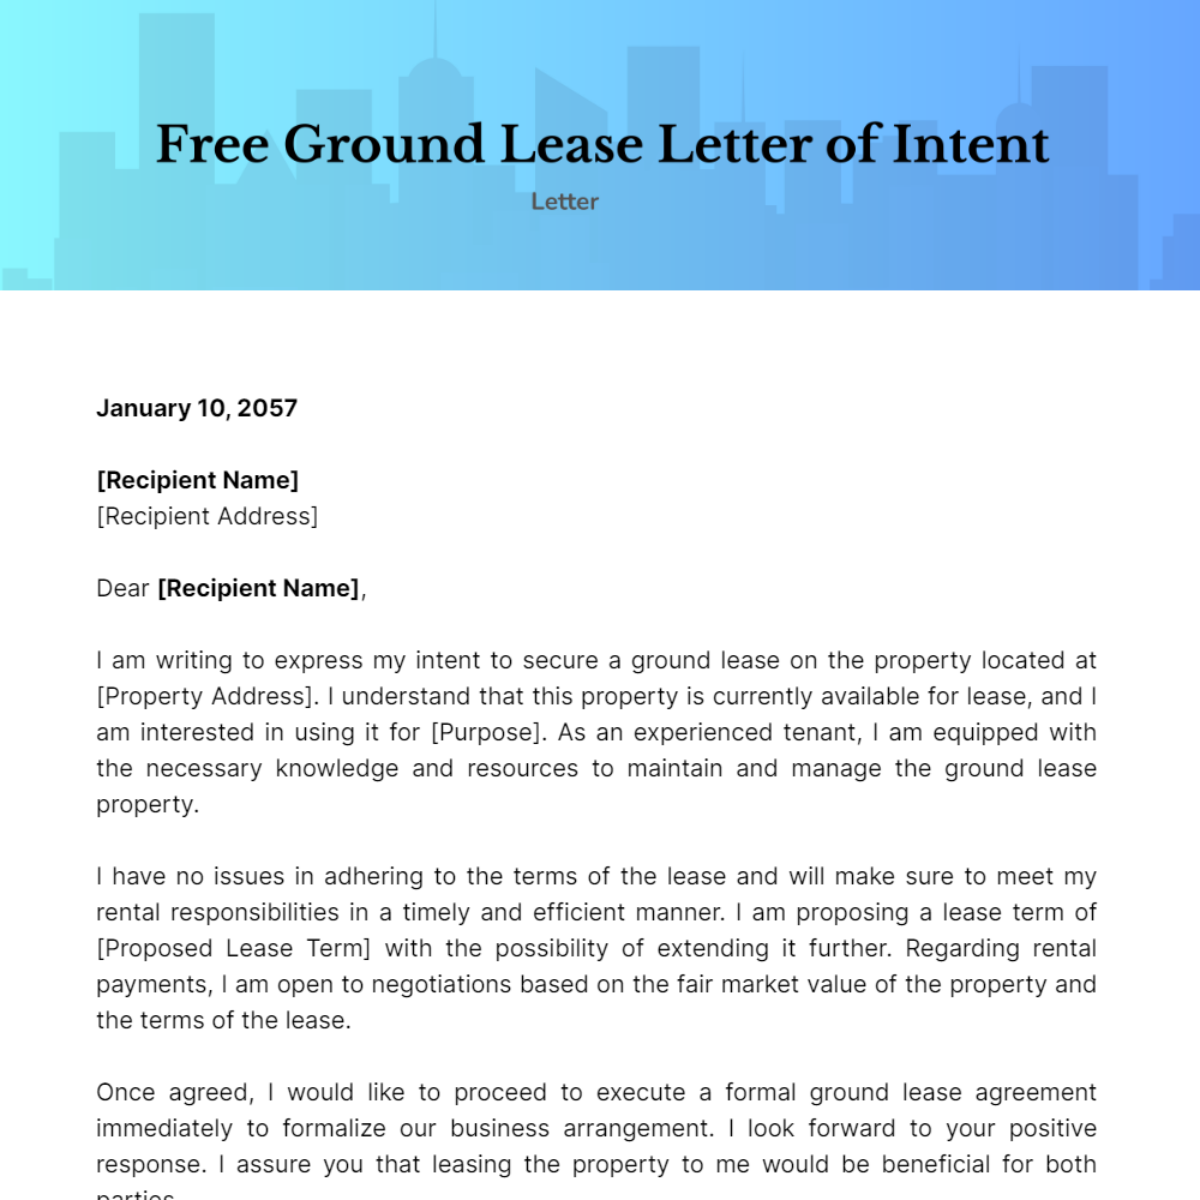 Ground Lease Letter of Intent Template